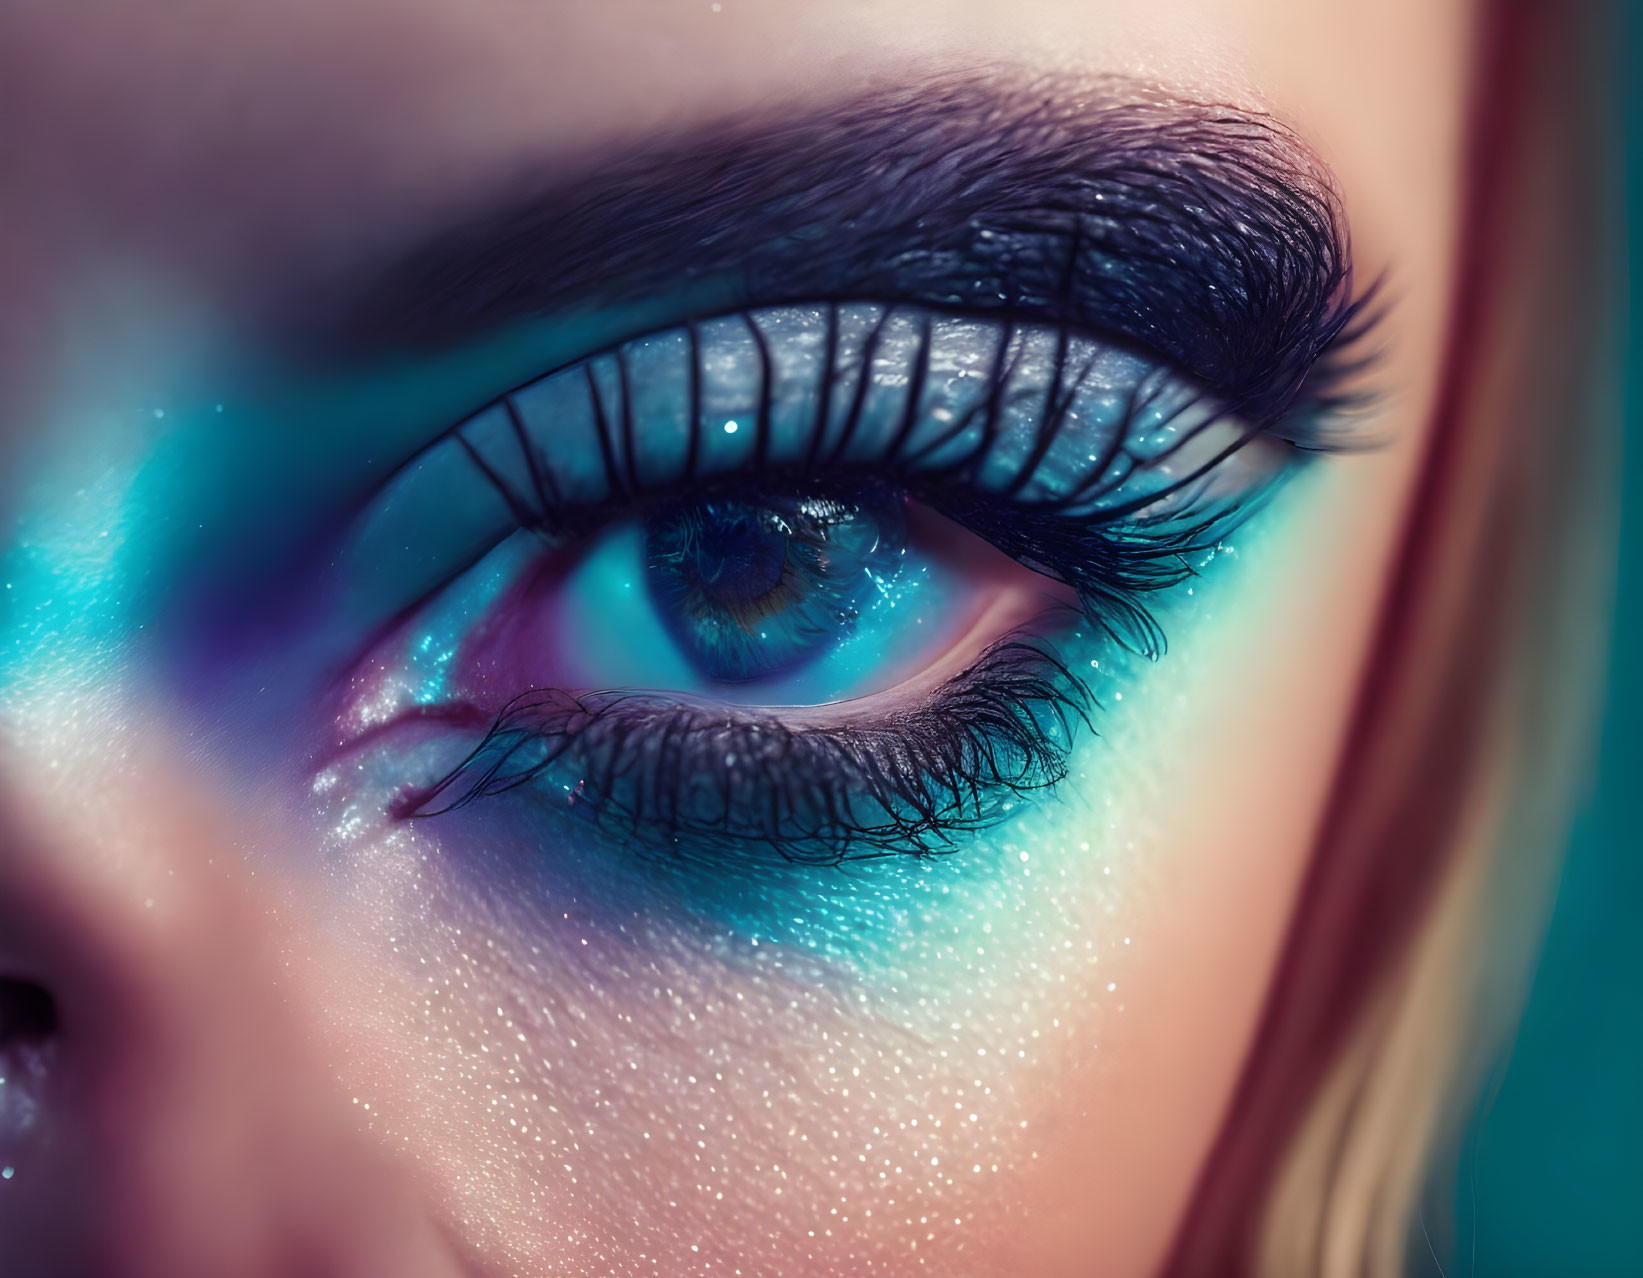 Close-up of person's eye with blue and purple makeup and glitter under vibrant lighting